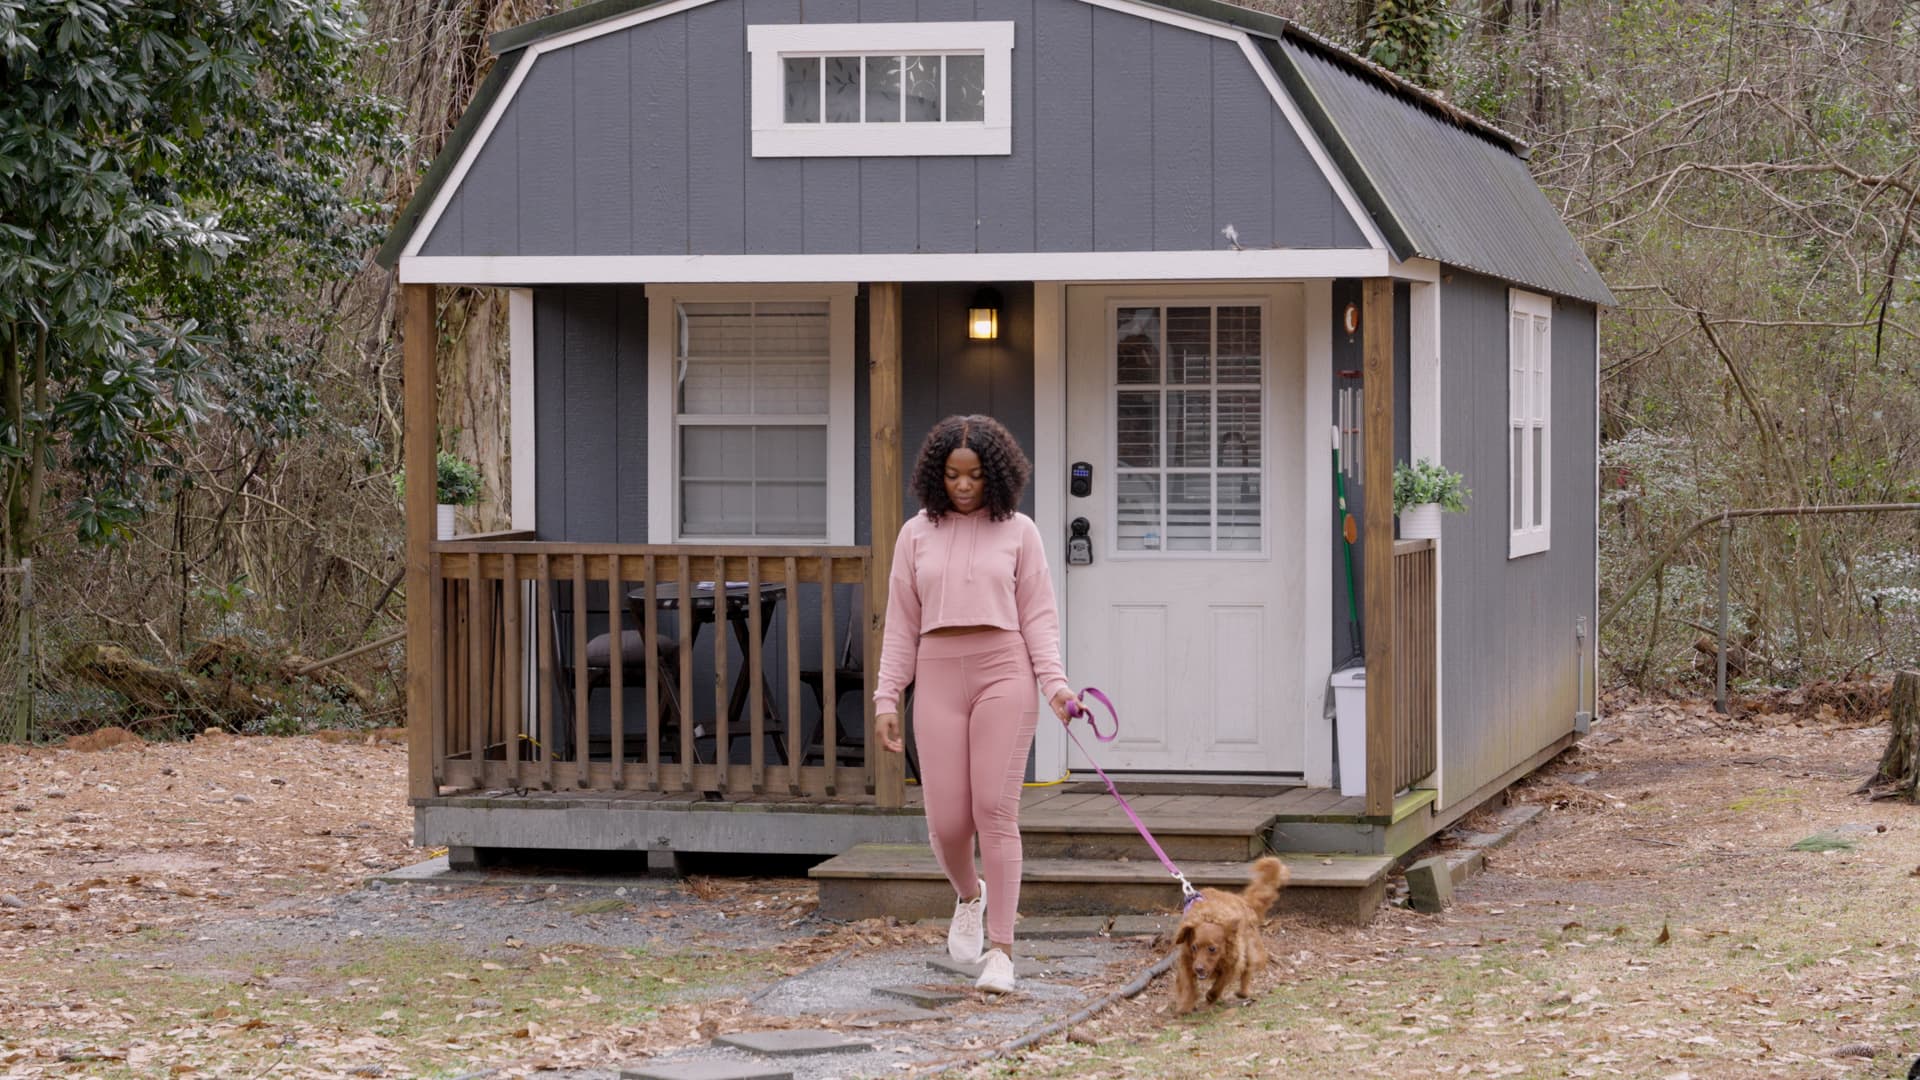 Tiny house trend comes to New Orleans: Could you live in 140 square feet?, Home/Garden